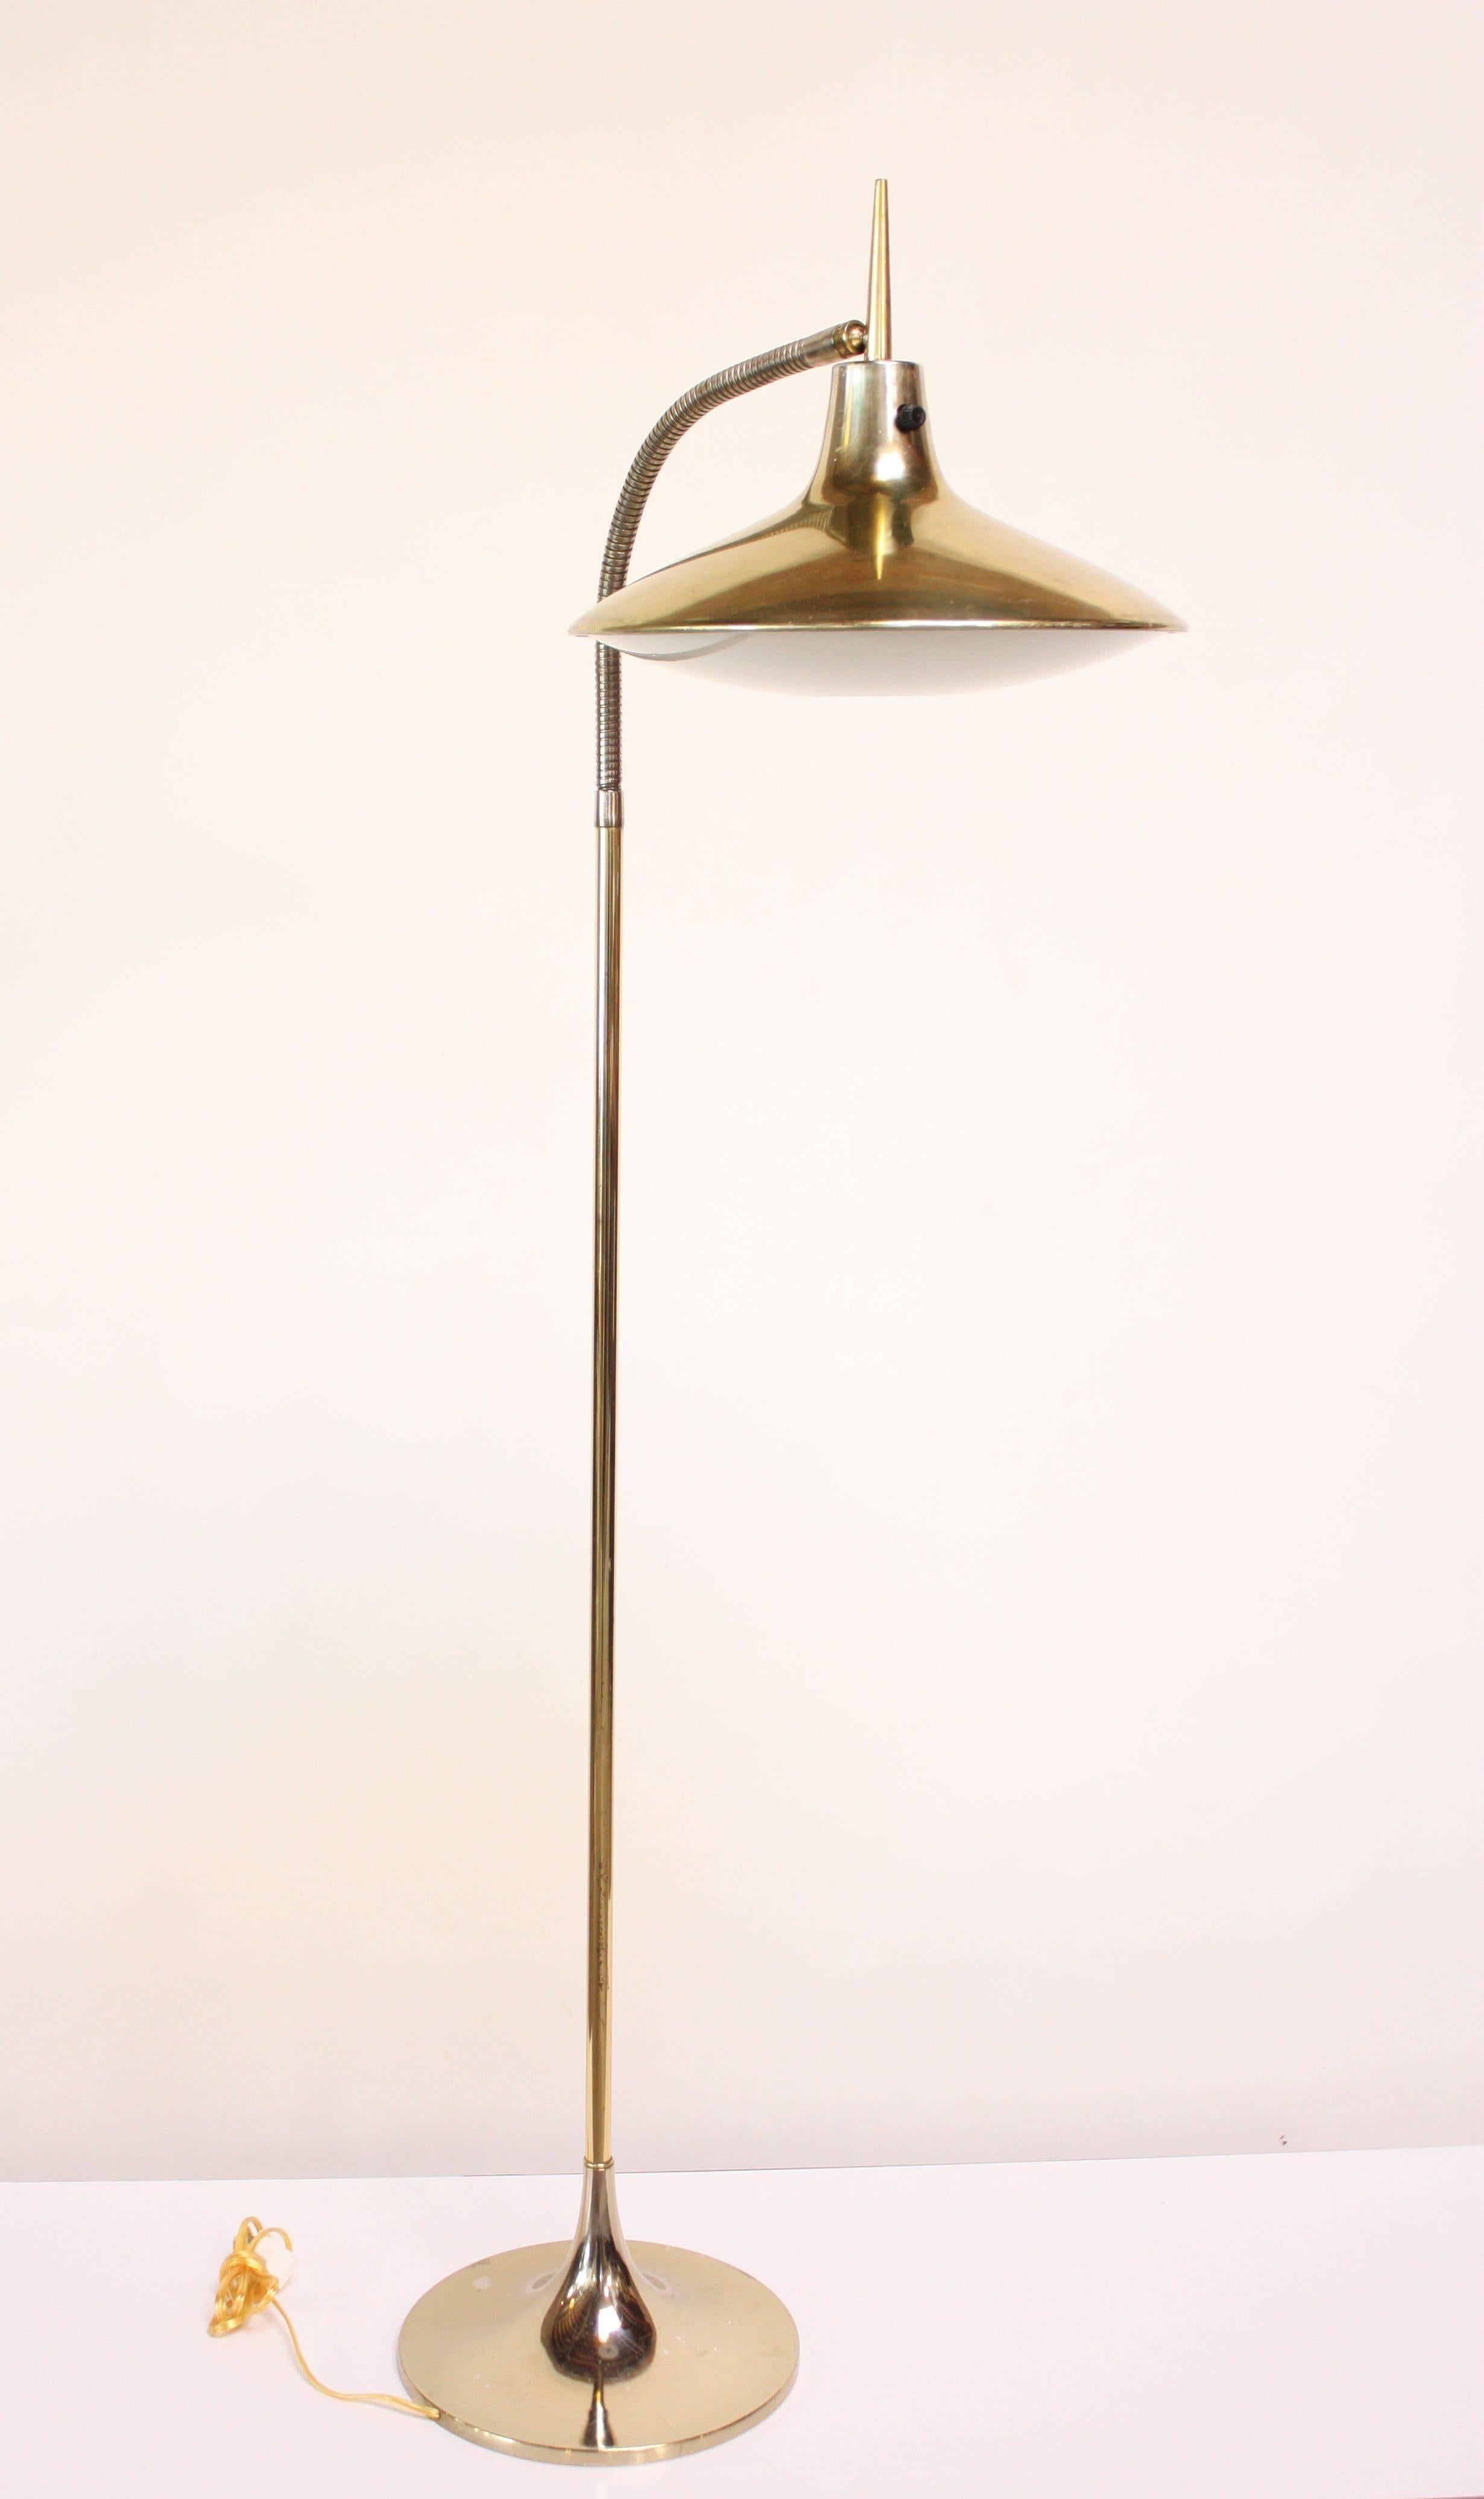 Laurel floor lamp (model B- 683) featuring a fully adjustable shade and original diffuser. Original condition with wear to the shade edges and base (spots of loss and light scratches). Remains in good, vintage condition - rewired and ready for use.